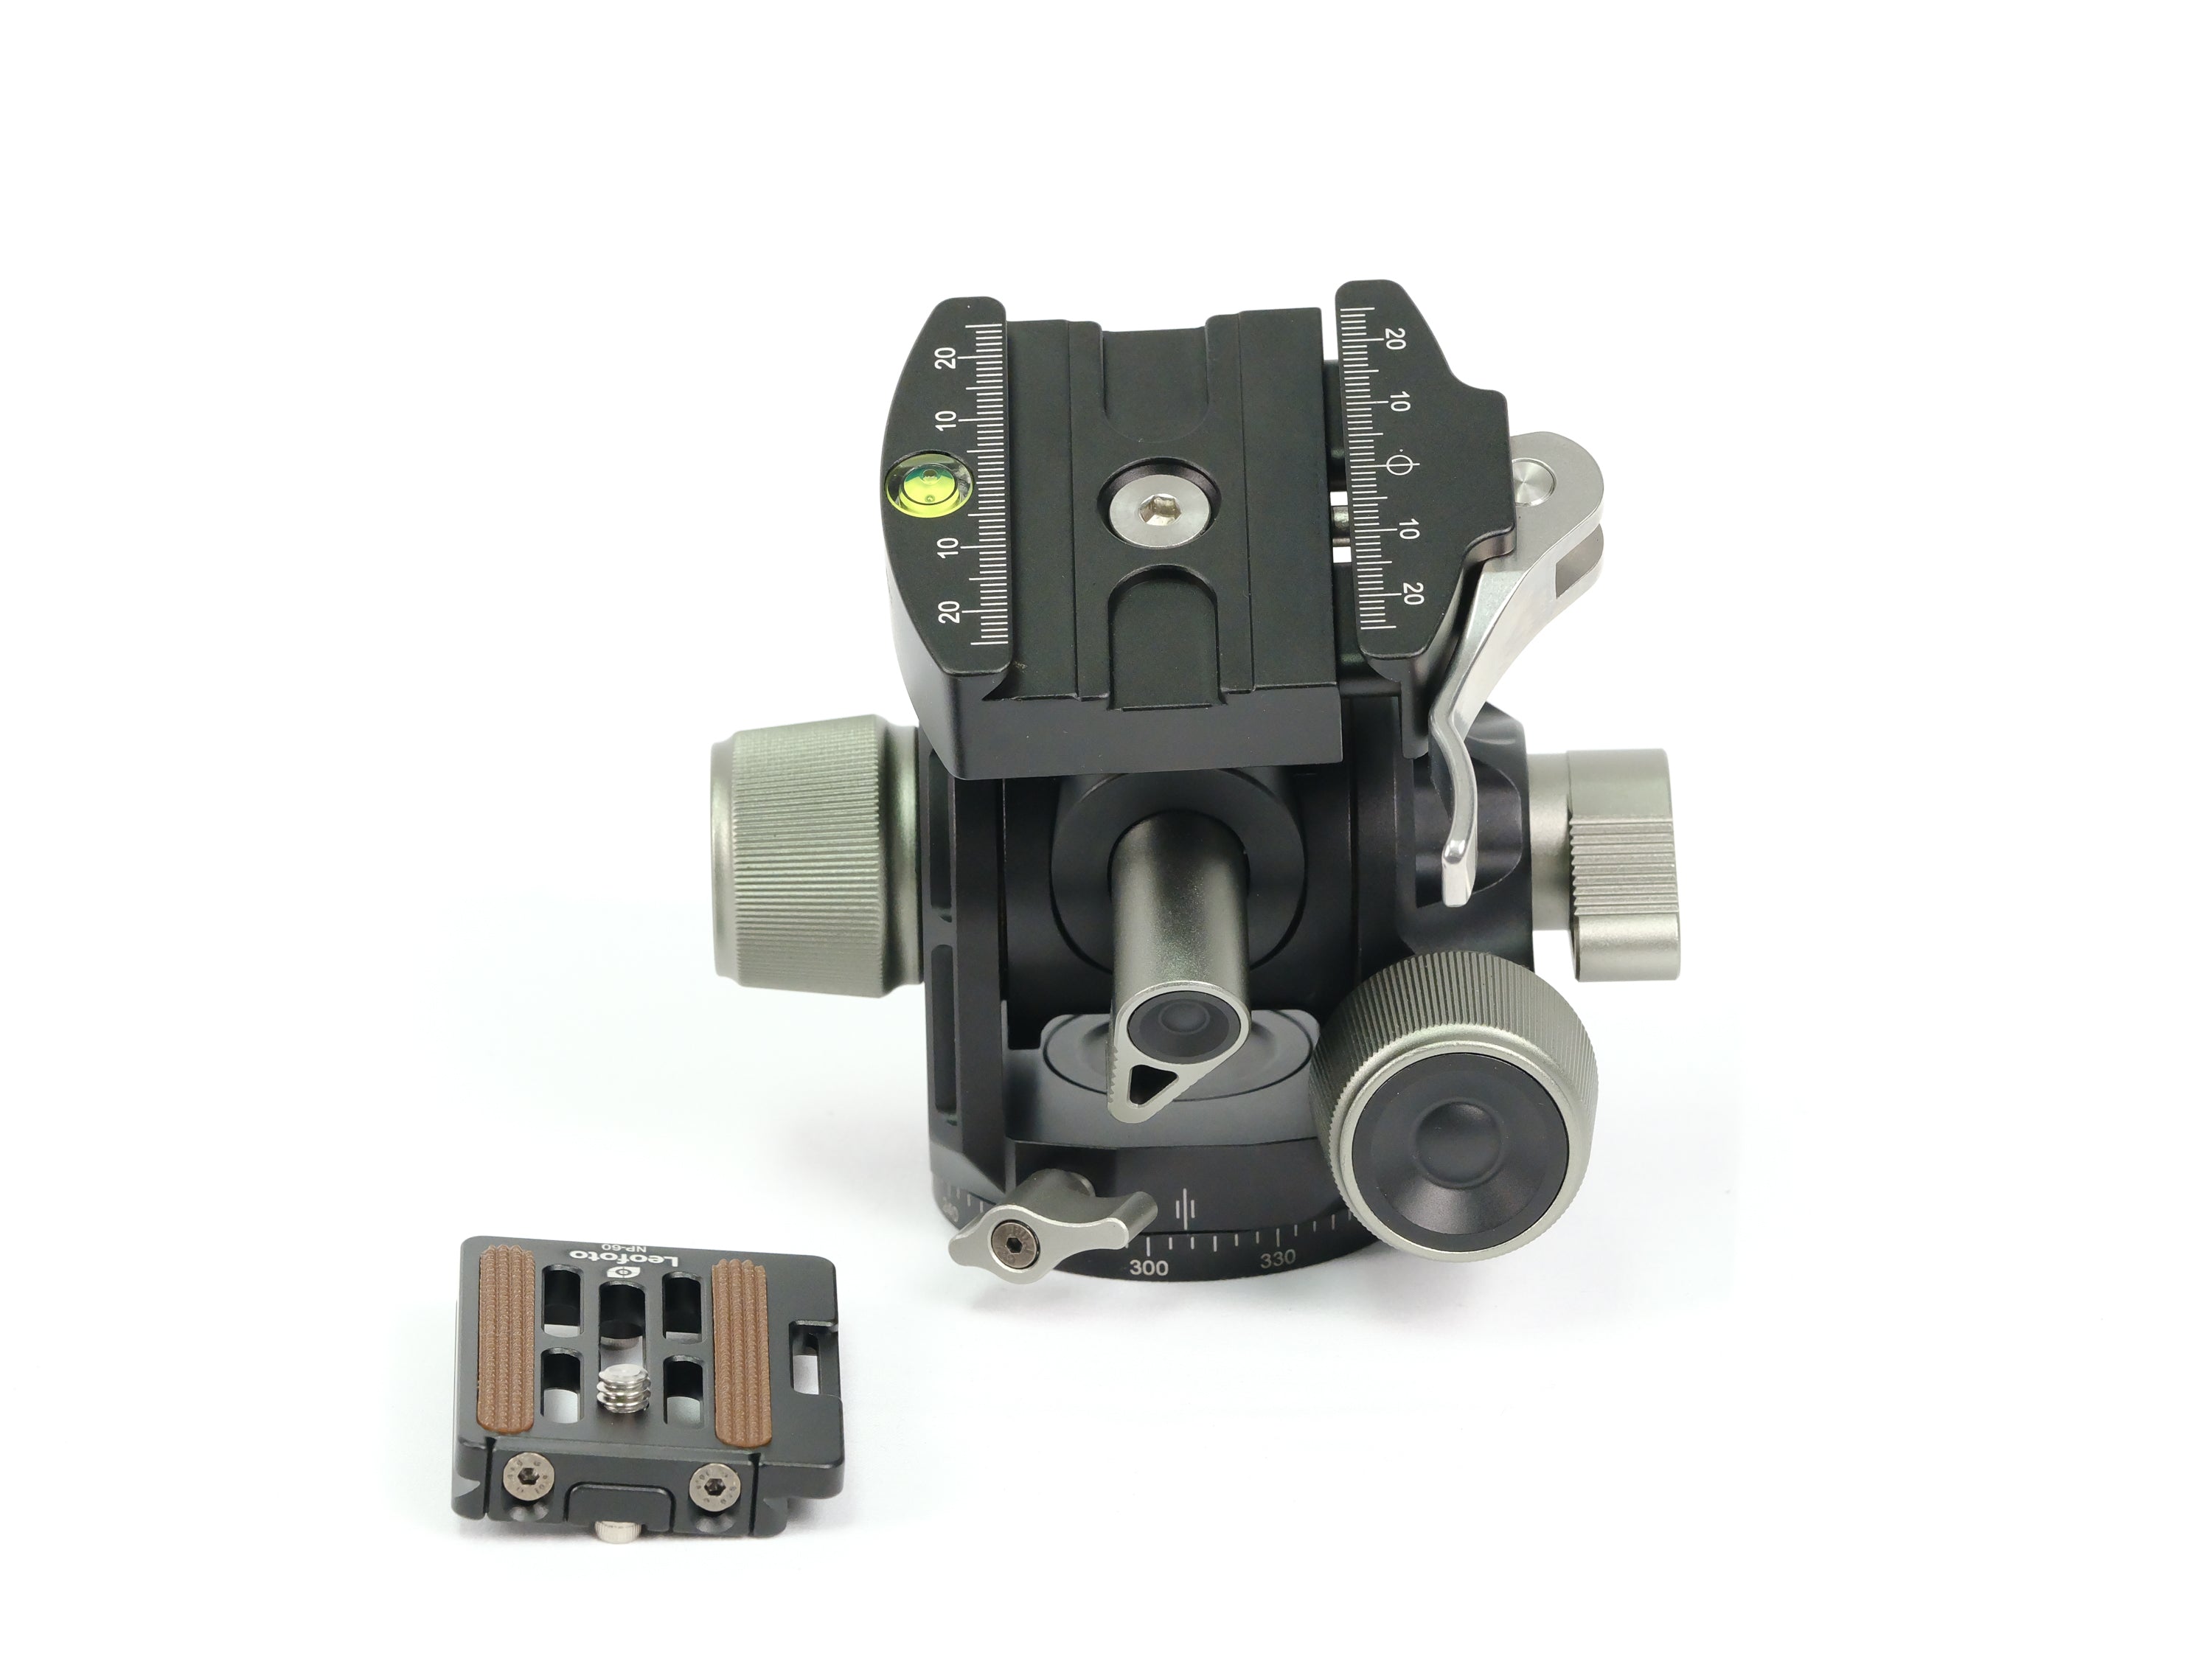 Leofoto G4-LR Four Way Geared Head with Lever Release Clamp | Arca Compatible